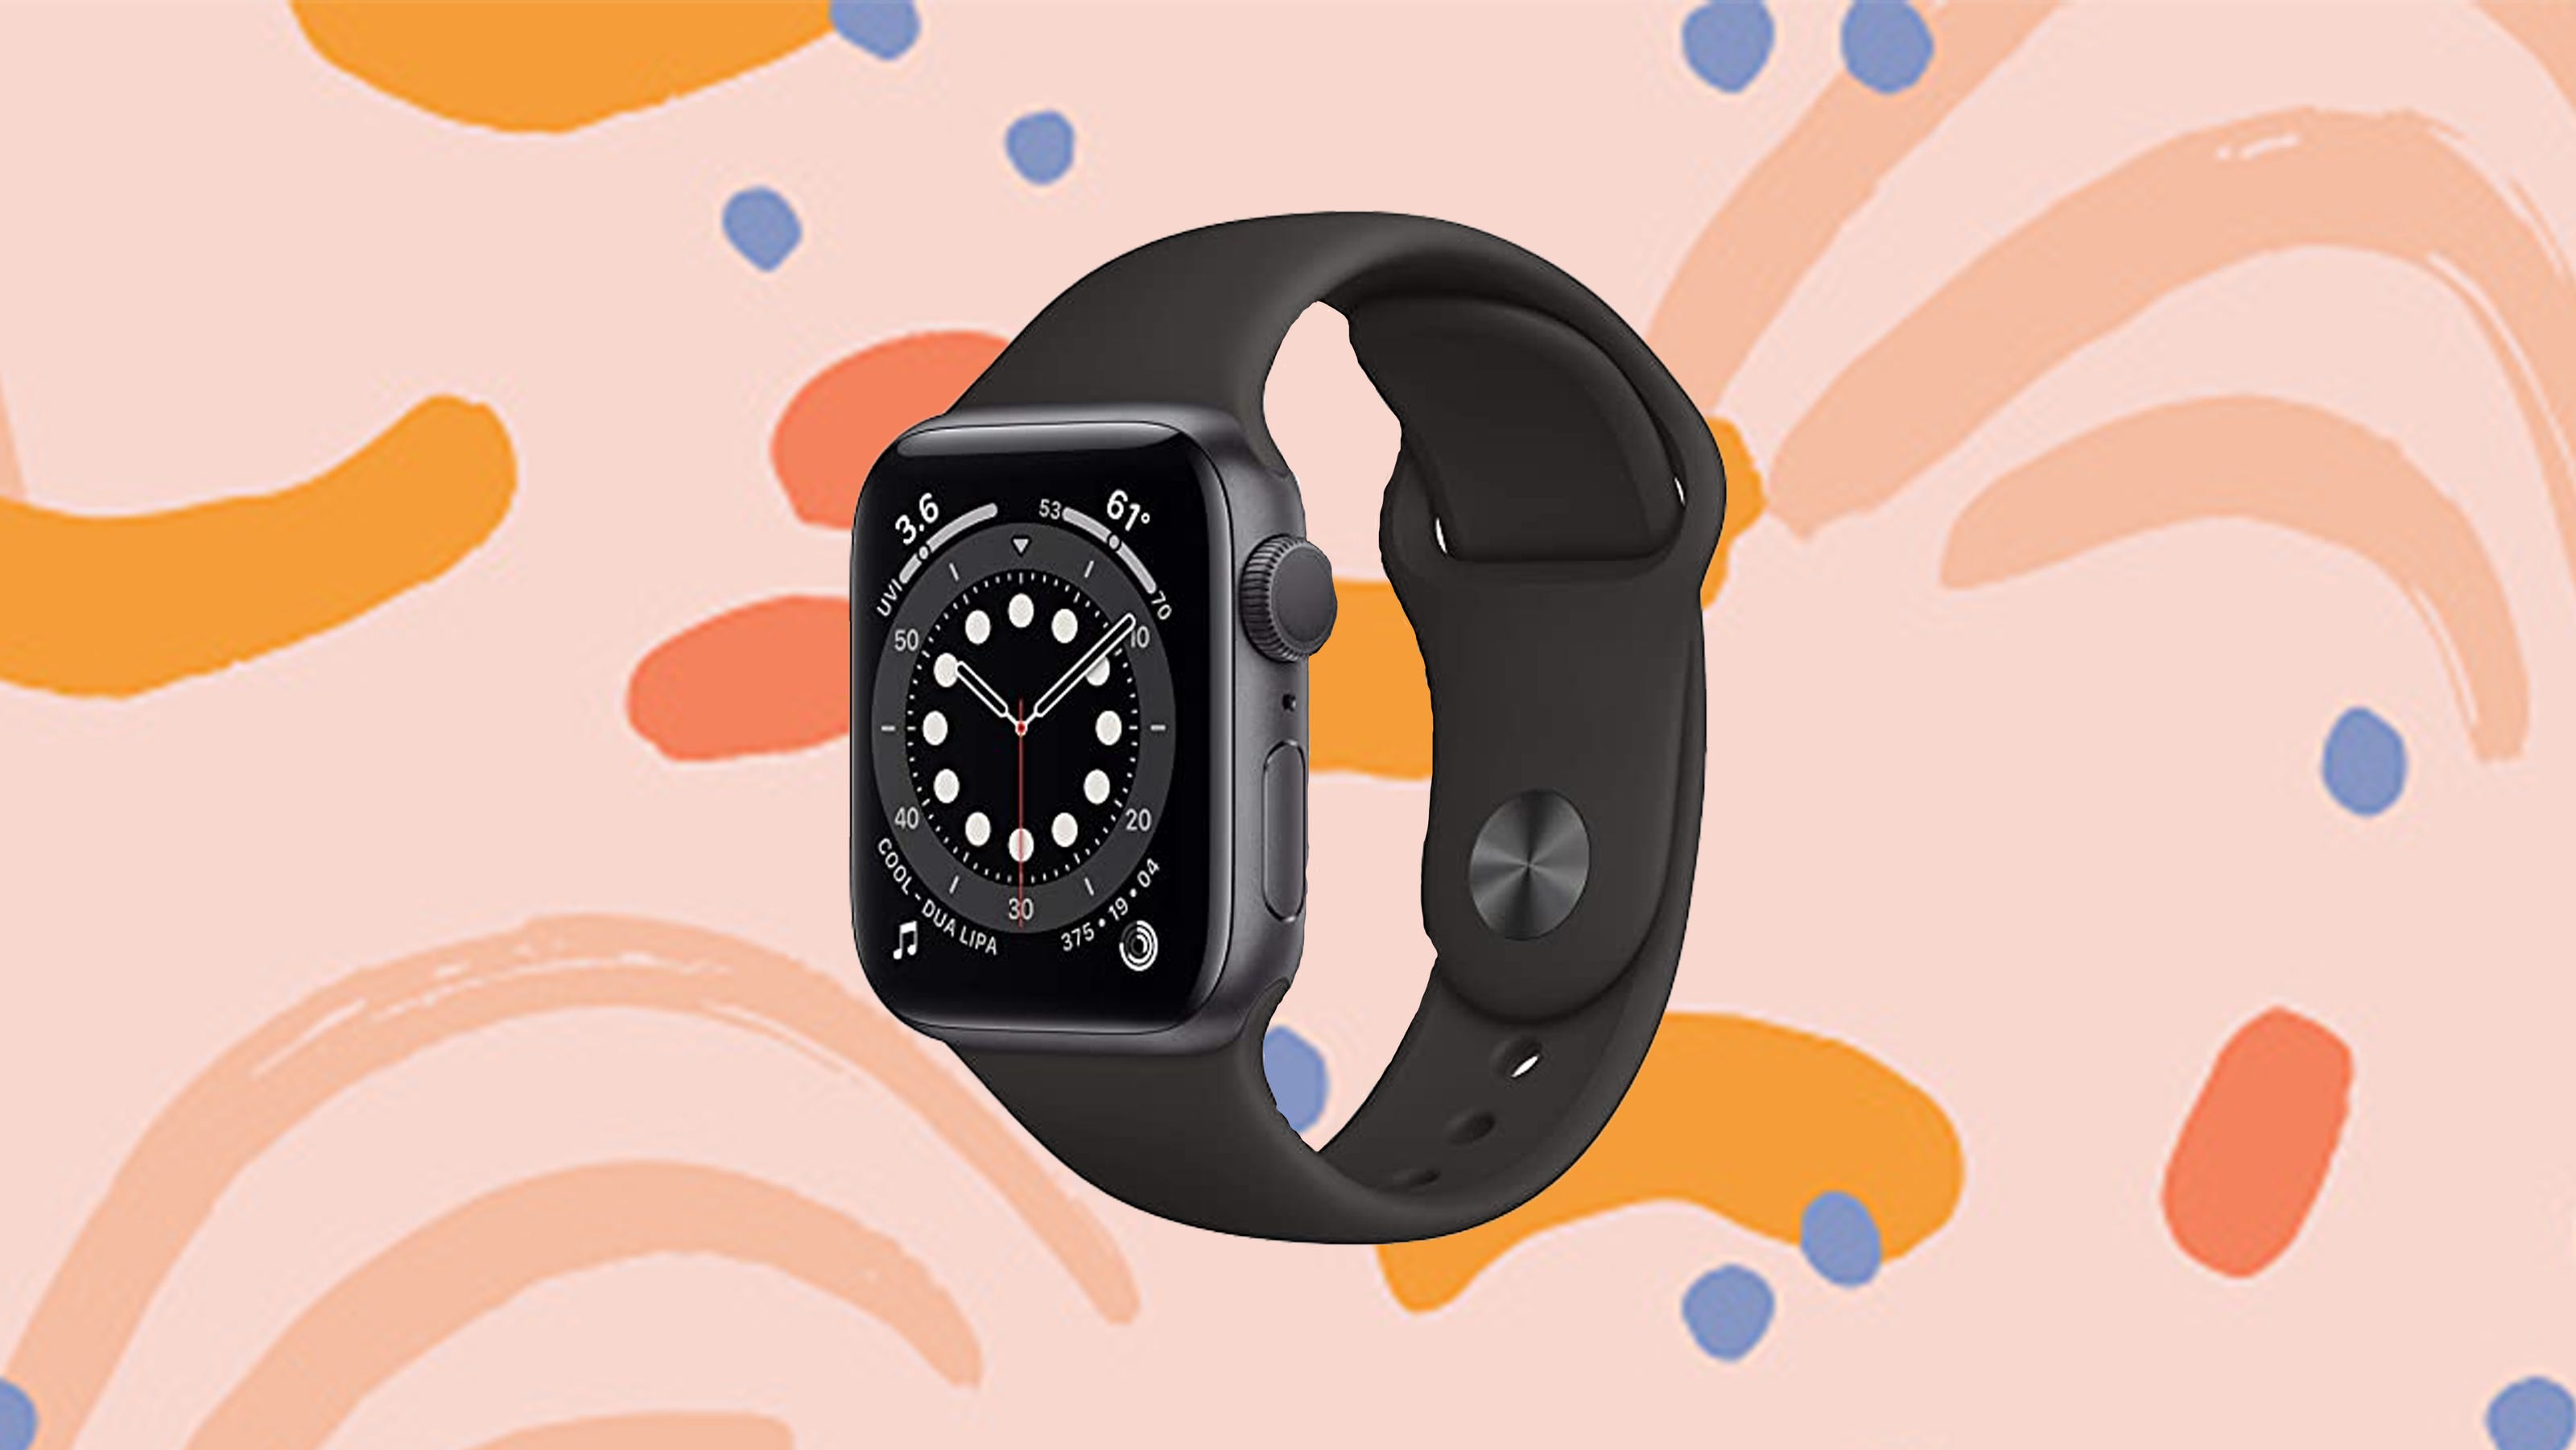 Apple Watch Series 6: Get Apple's latest-and-greatest smartwatch on sale